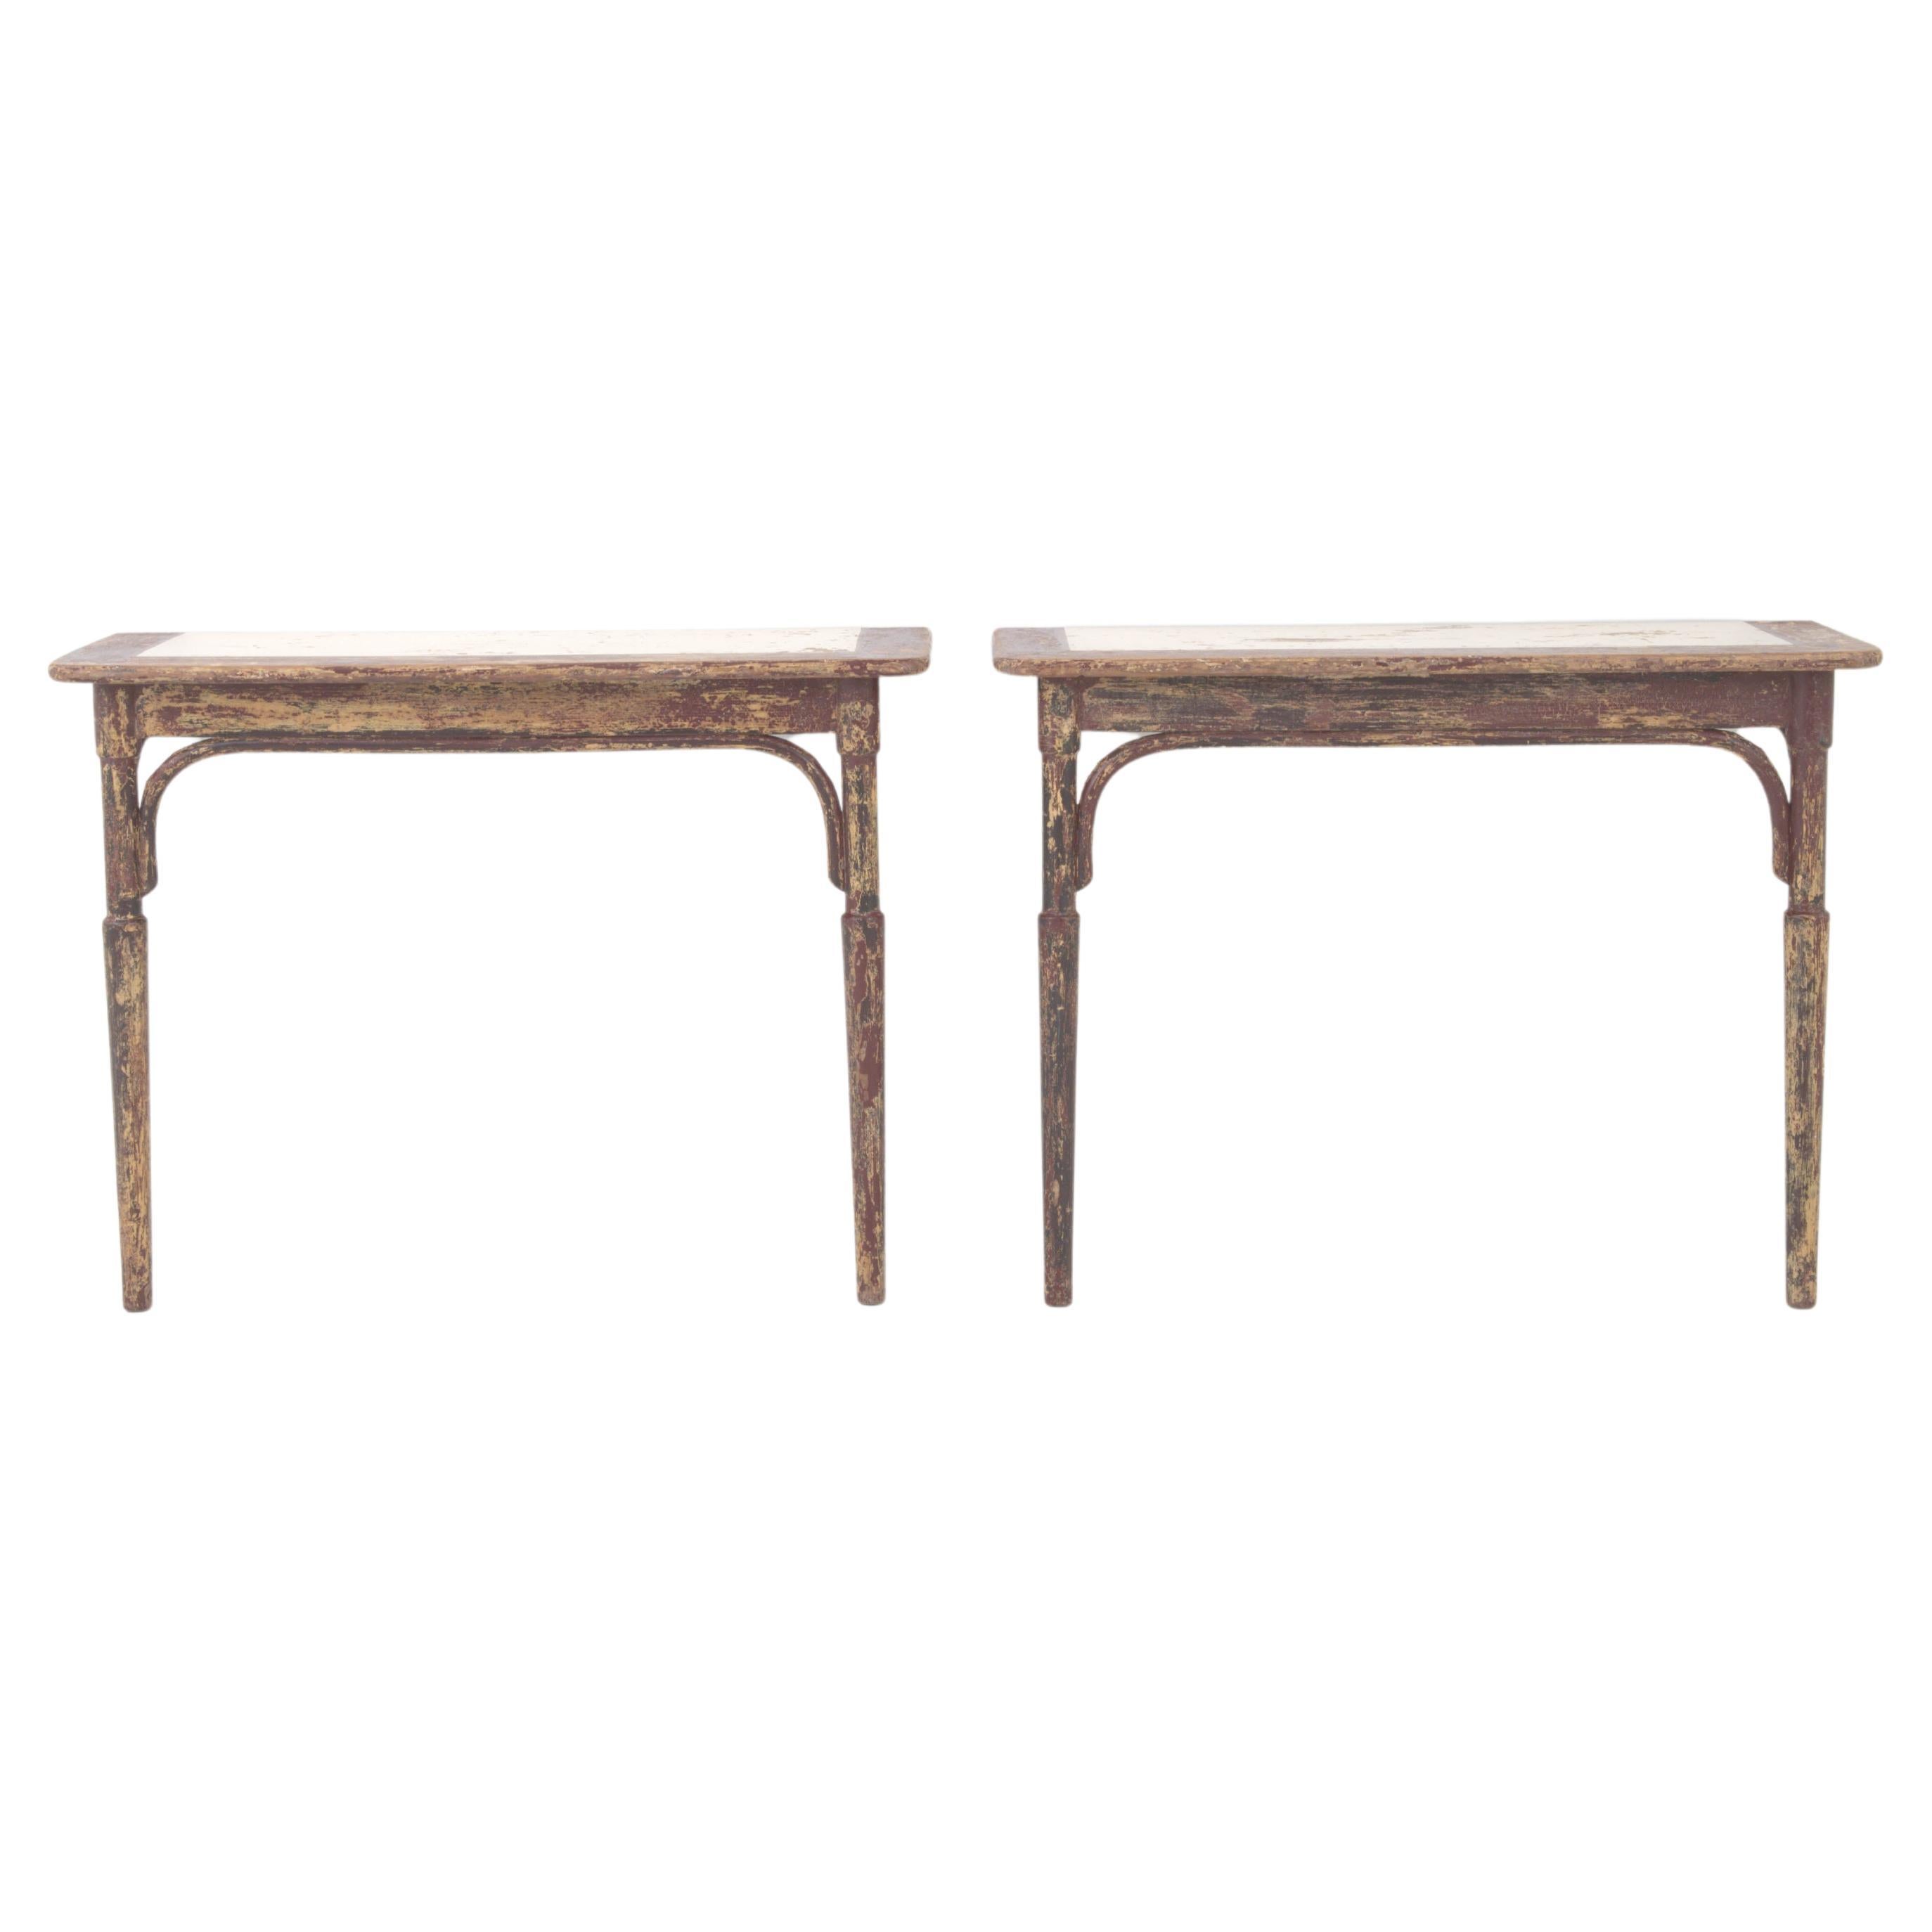 Early 20th Century French Wood Patinated Console Tables By Thonet, a Pair For Sale